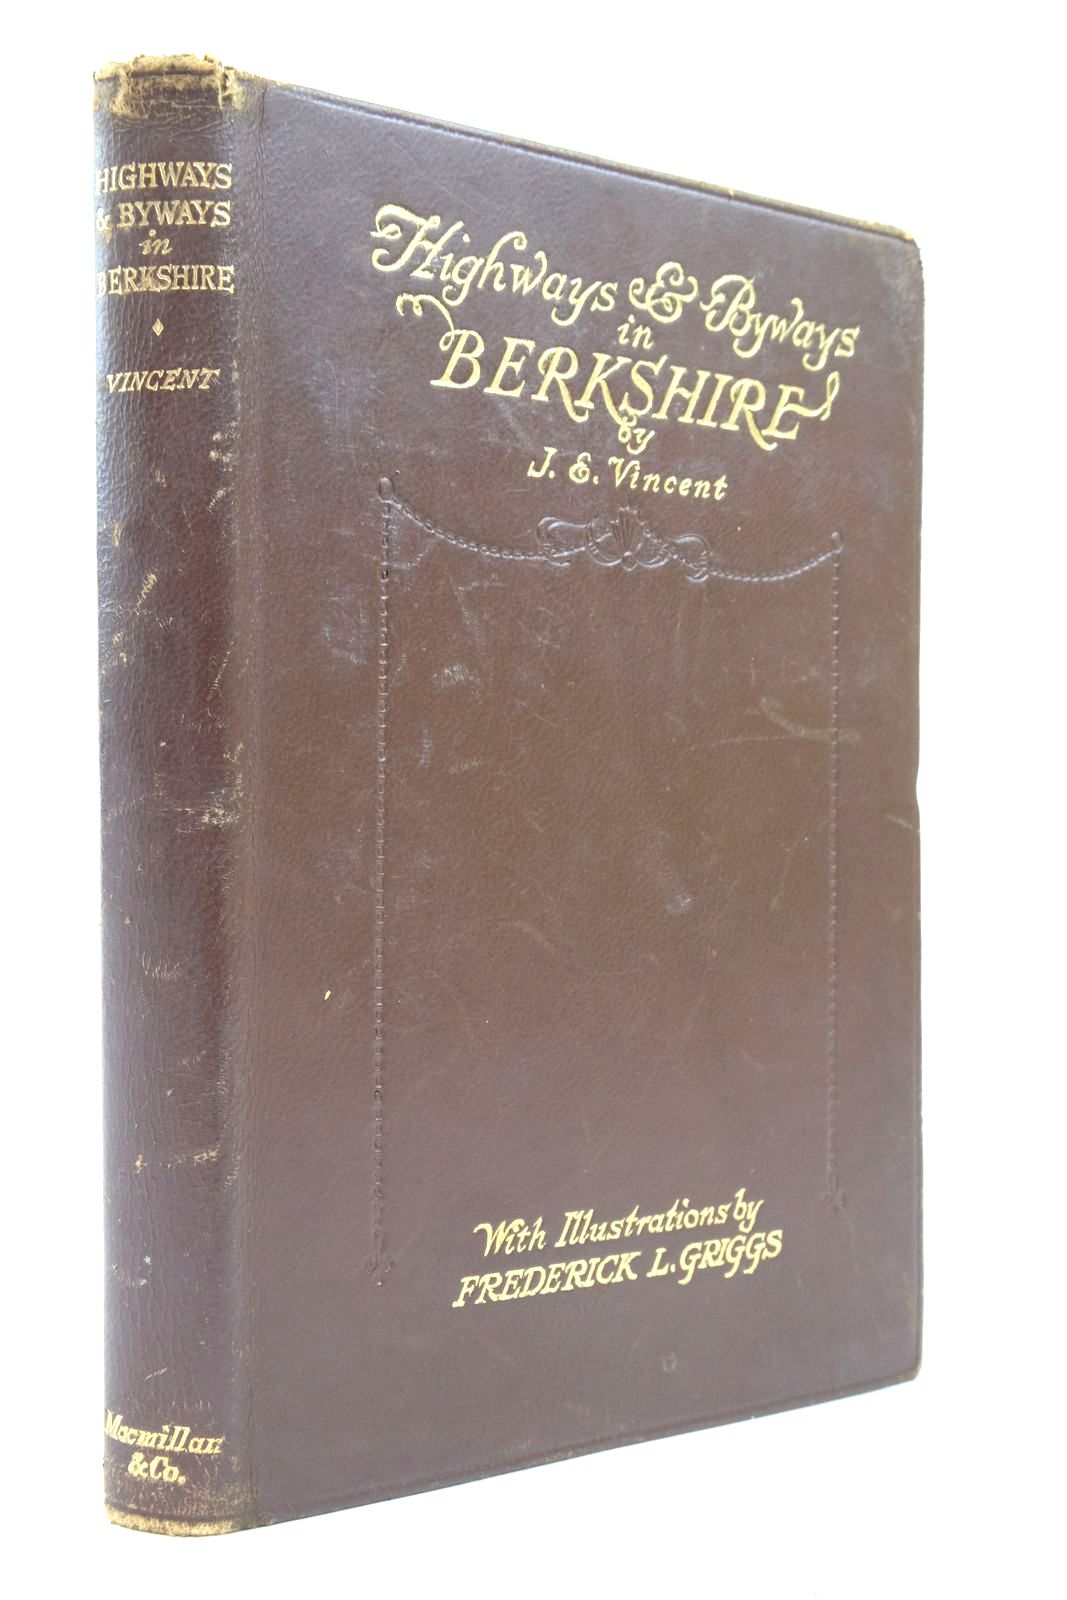 Photo of HIGHWAYS AND BYWAYS IN BERKSHIRE written by Vincent, James Edmund illustrated by Griggs, Frederick L. published by Macmillan &amp; Co. Ltd. (STOCK CODE: 2137626)  for sale by Stella & Rose's Books